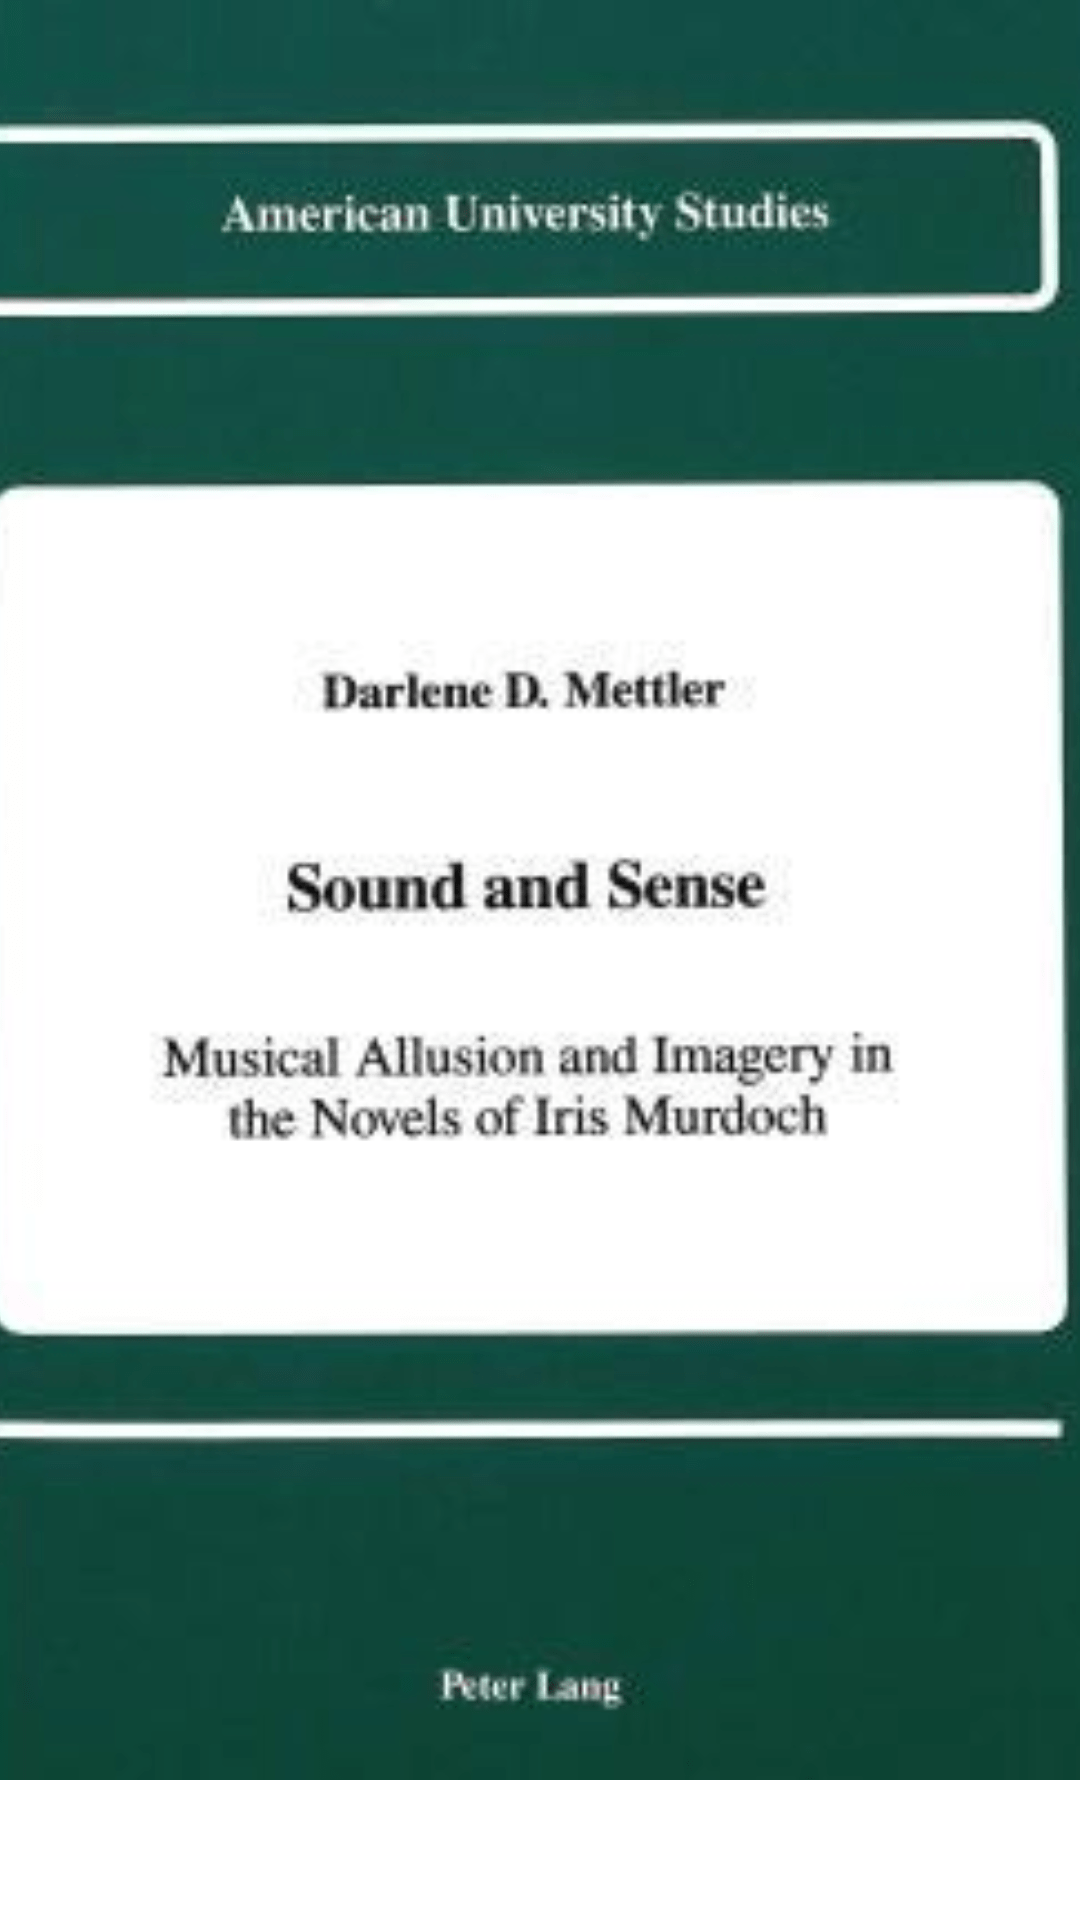 Sound and Sense: Musical Allusion and Imagery in the Novels of Iris Murdoch